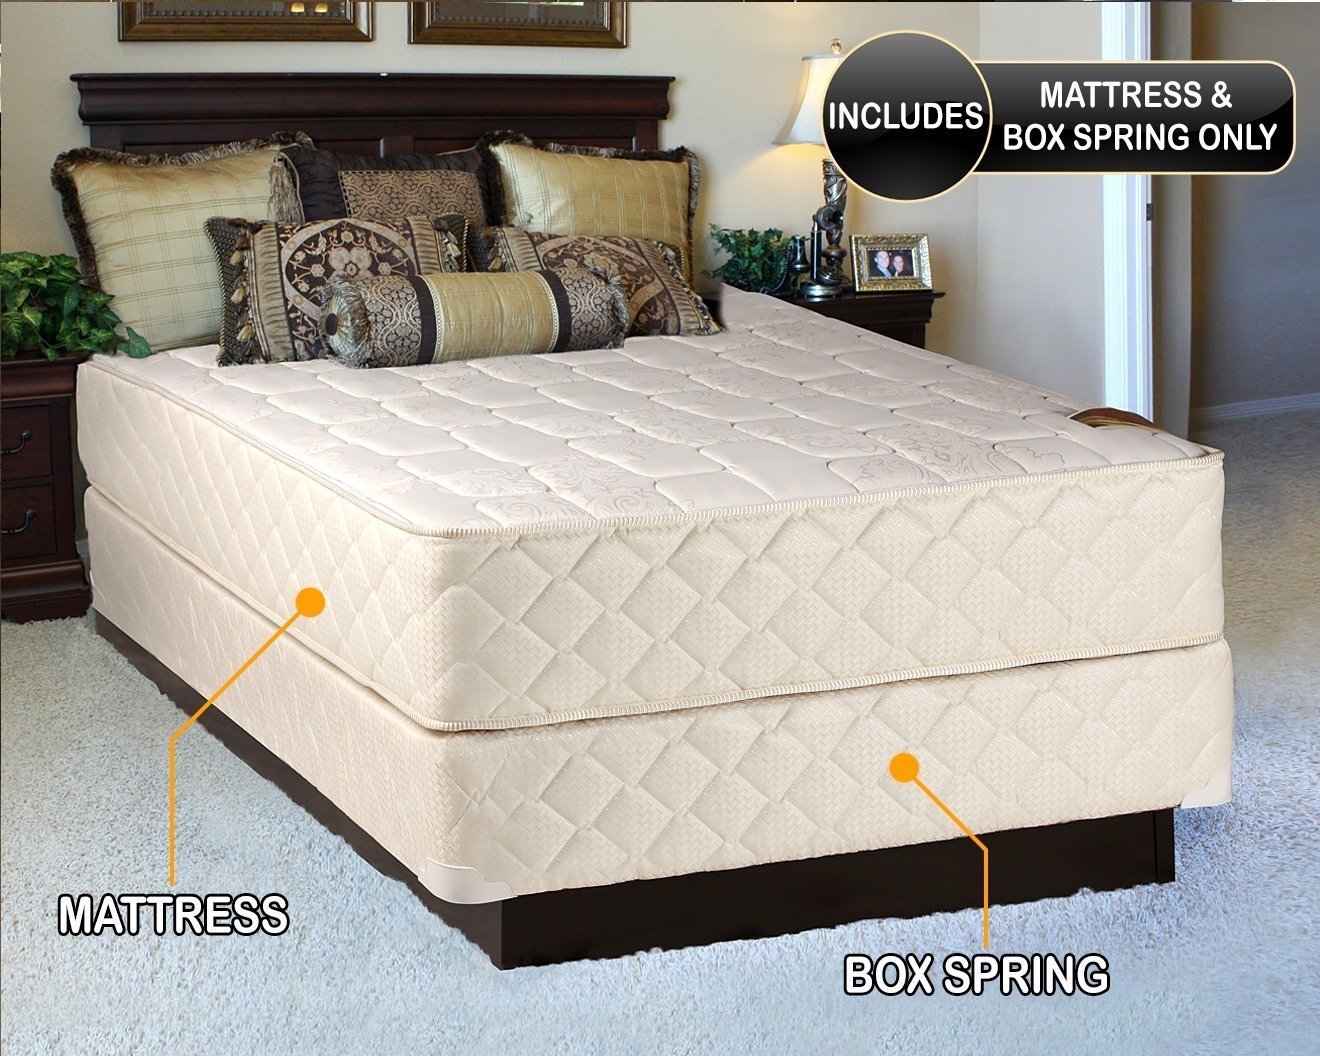 Dream Sleep Grandeur Deluxe 2-Sided Twin Size Mattress and ...